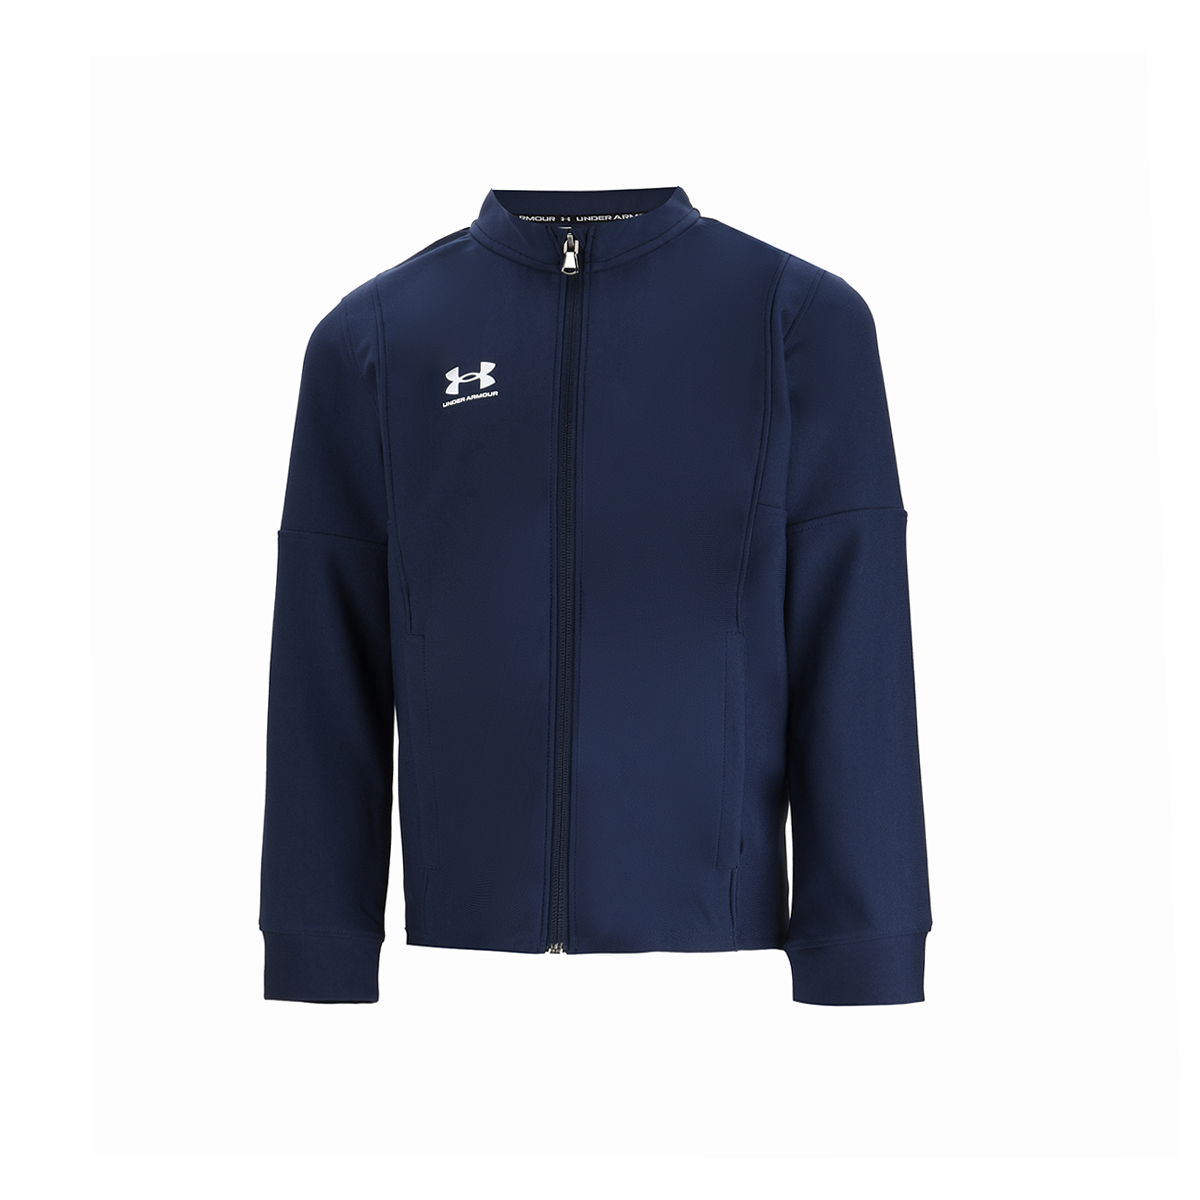 Conjunto Under Armour Challenger Niño Poliéster,  image number null